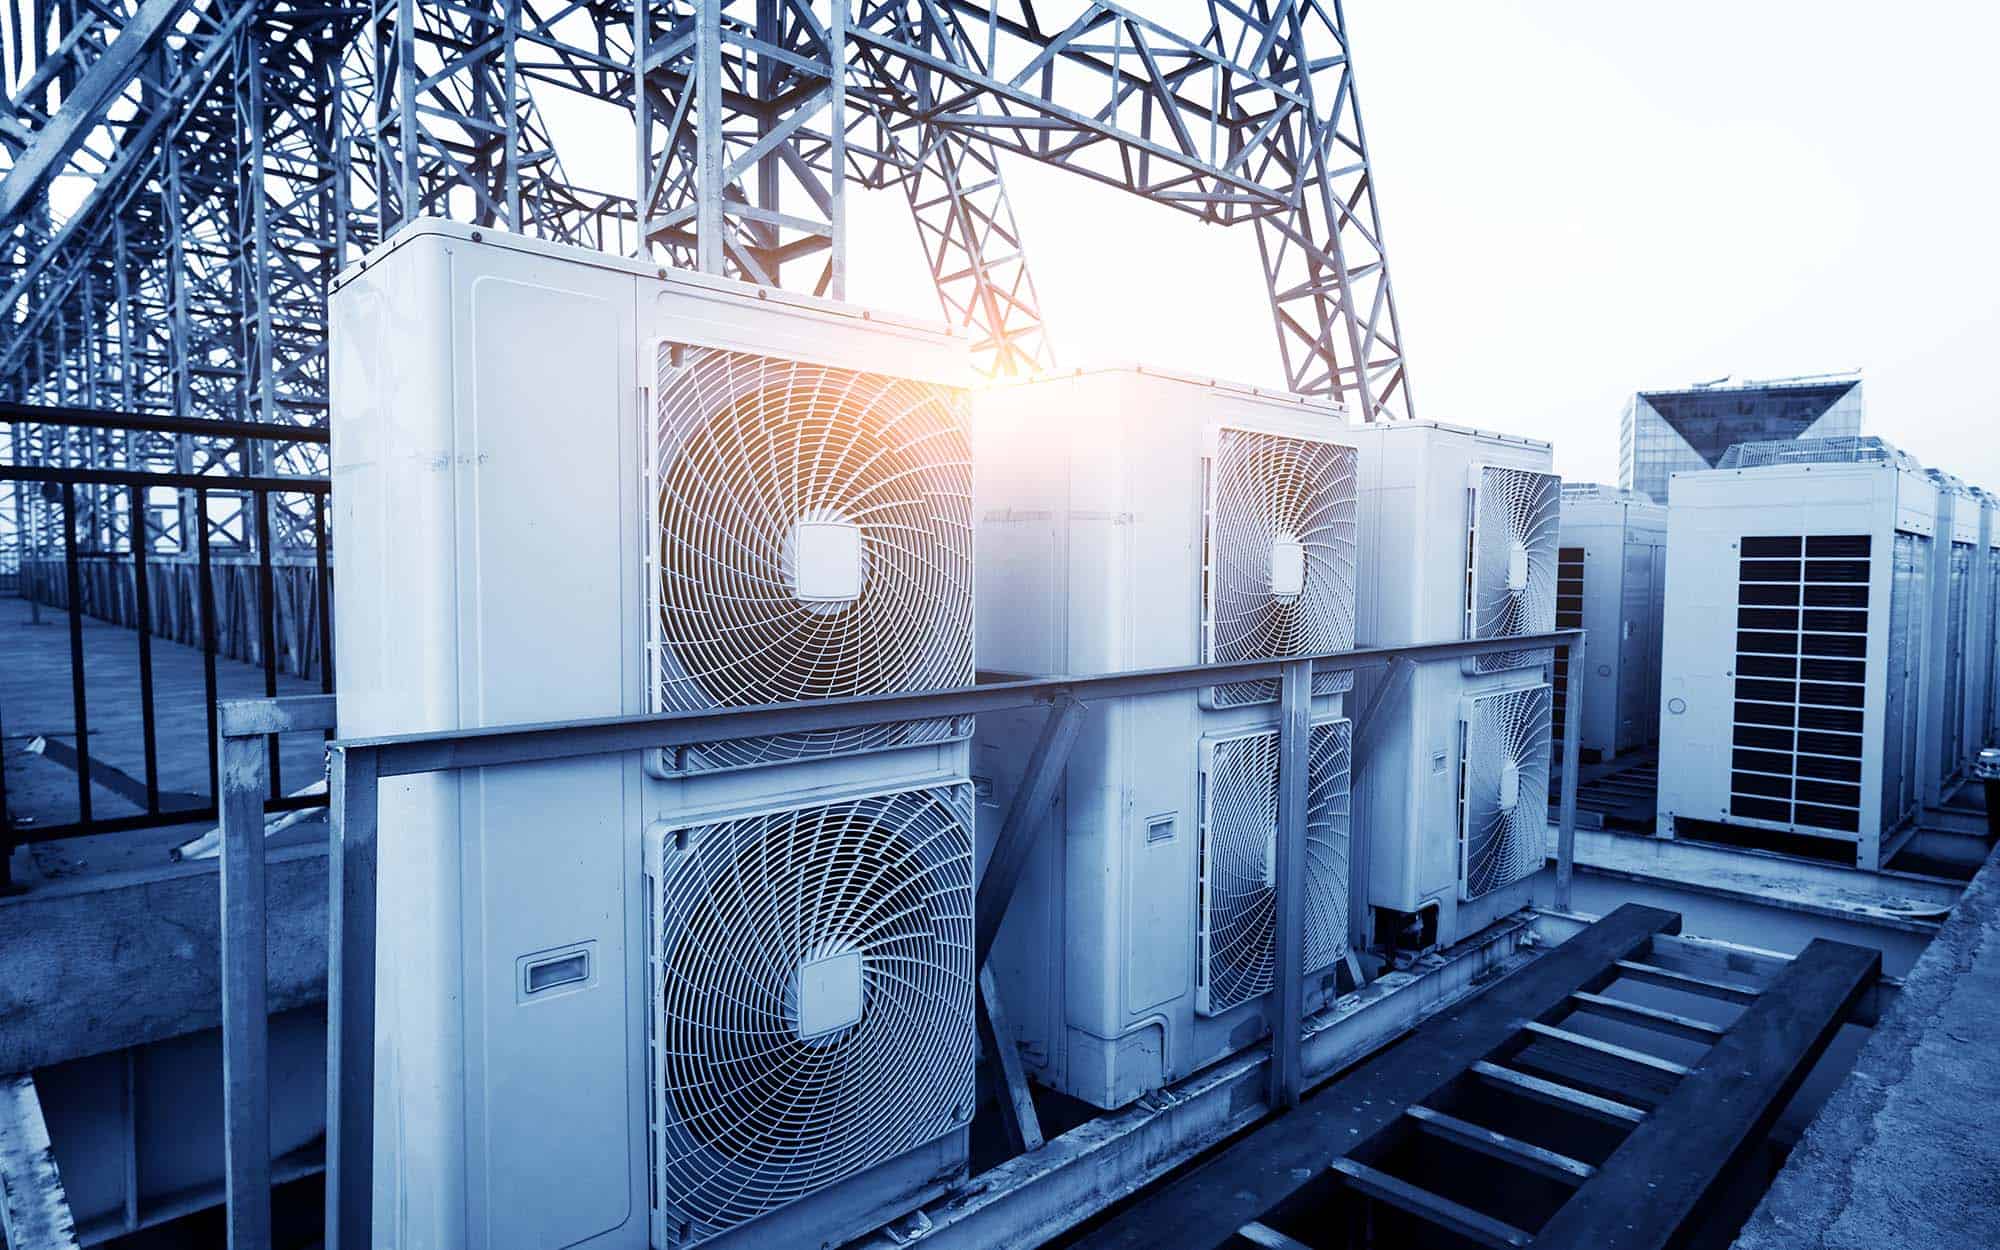 Air Conditioner Units (hvac) On A Roof Of Industrial Building With Blue Sky And Clouds In The Background | React Industries